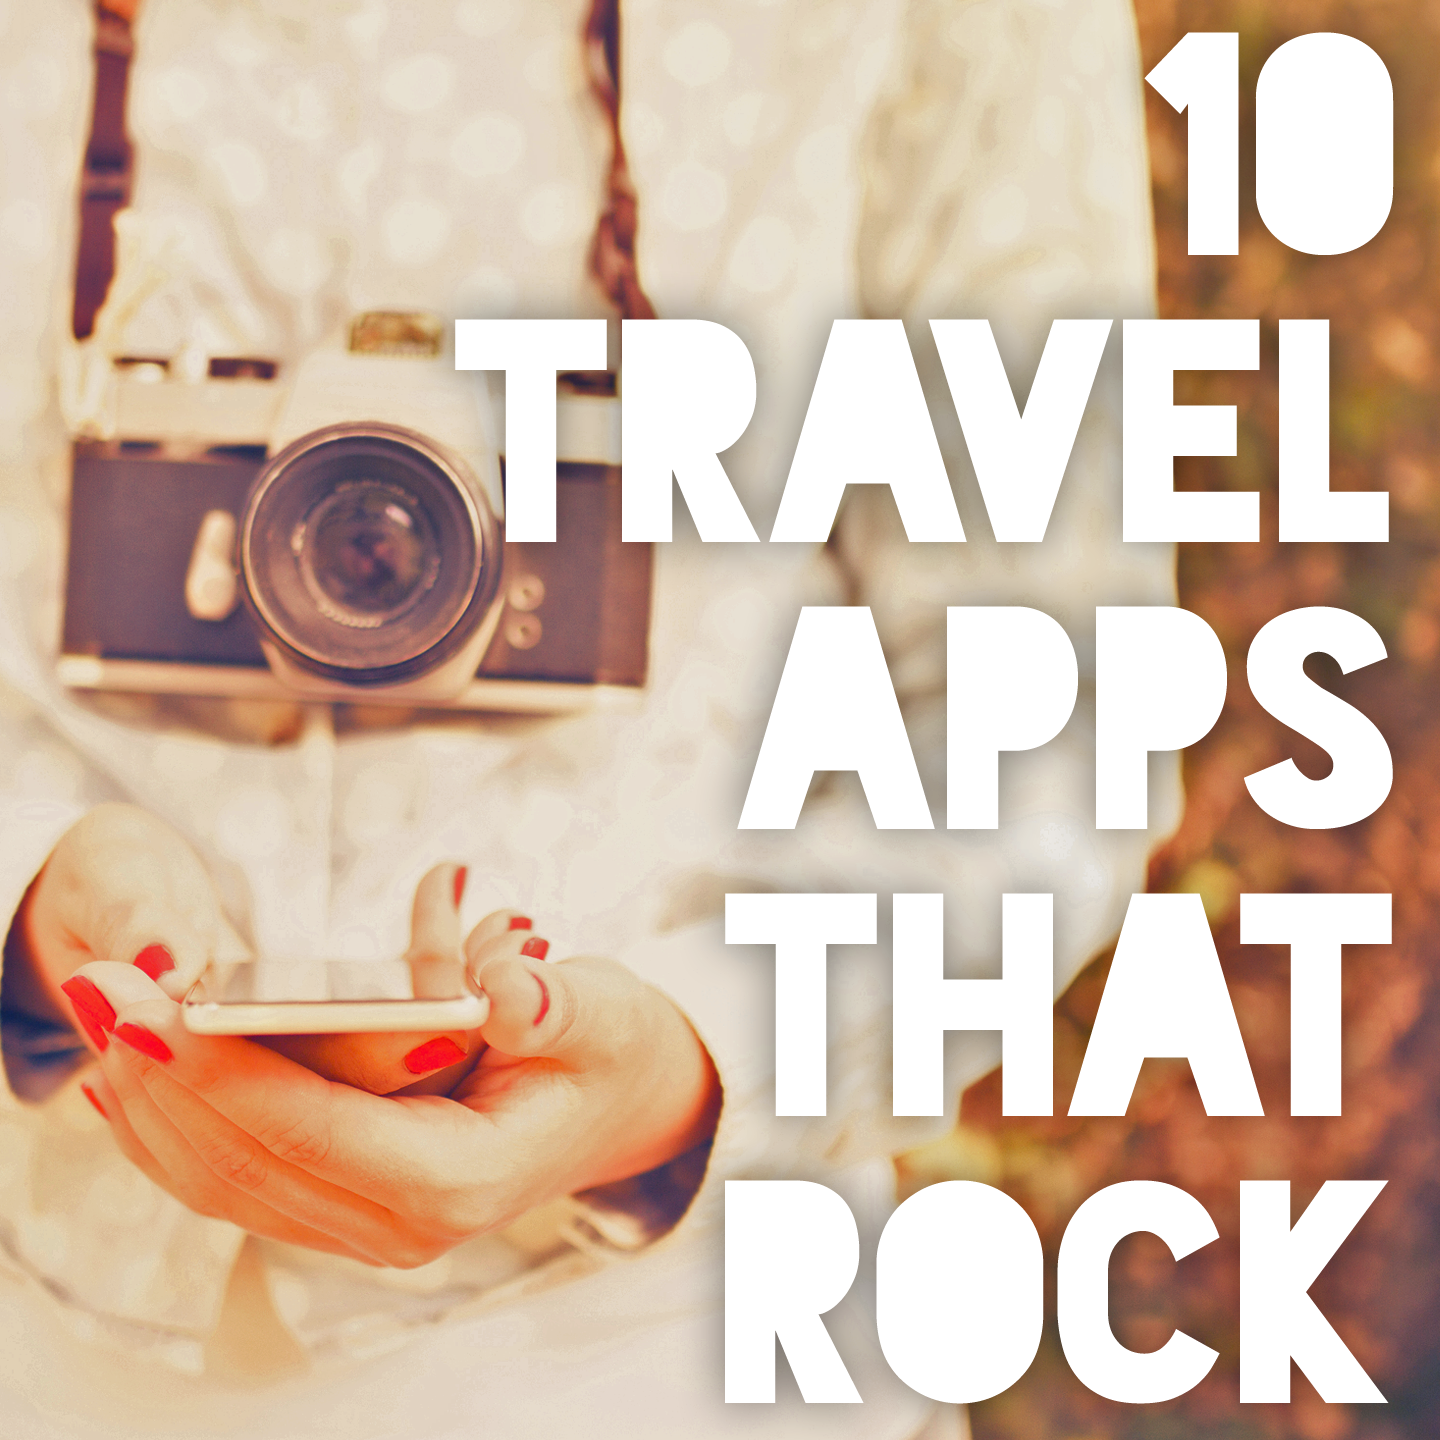 10 Travel Apps that Rock